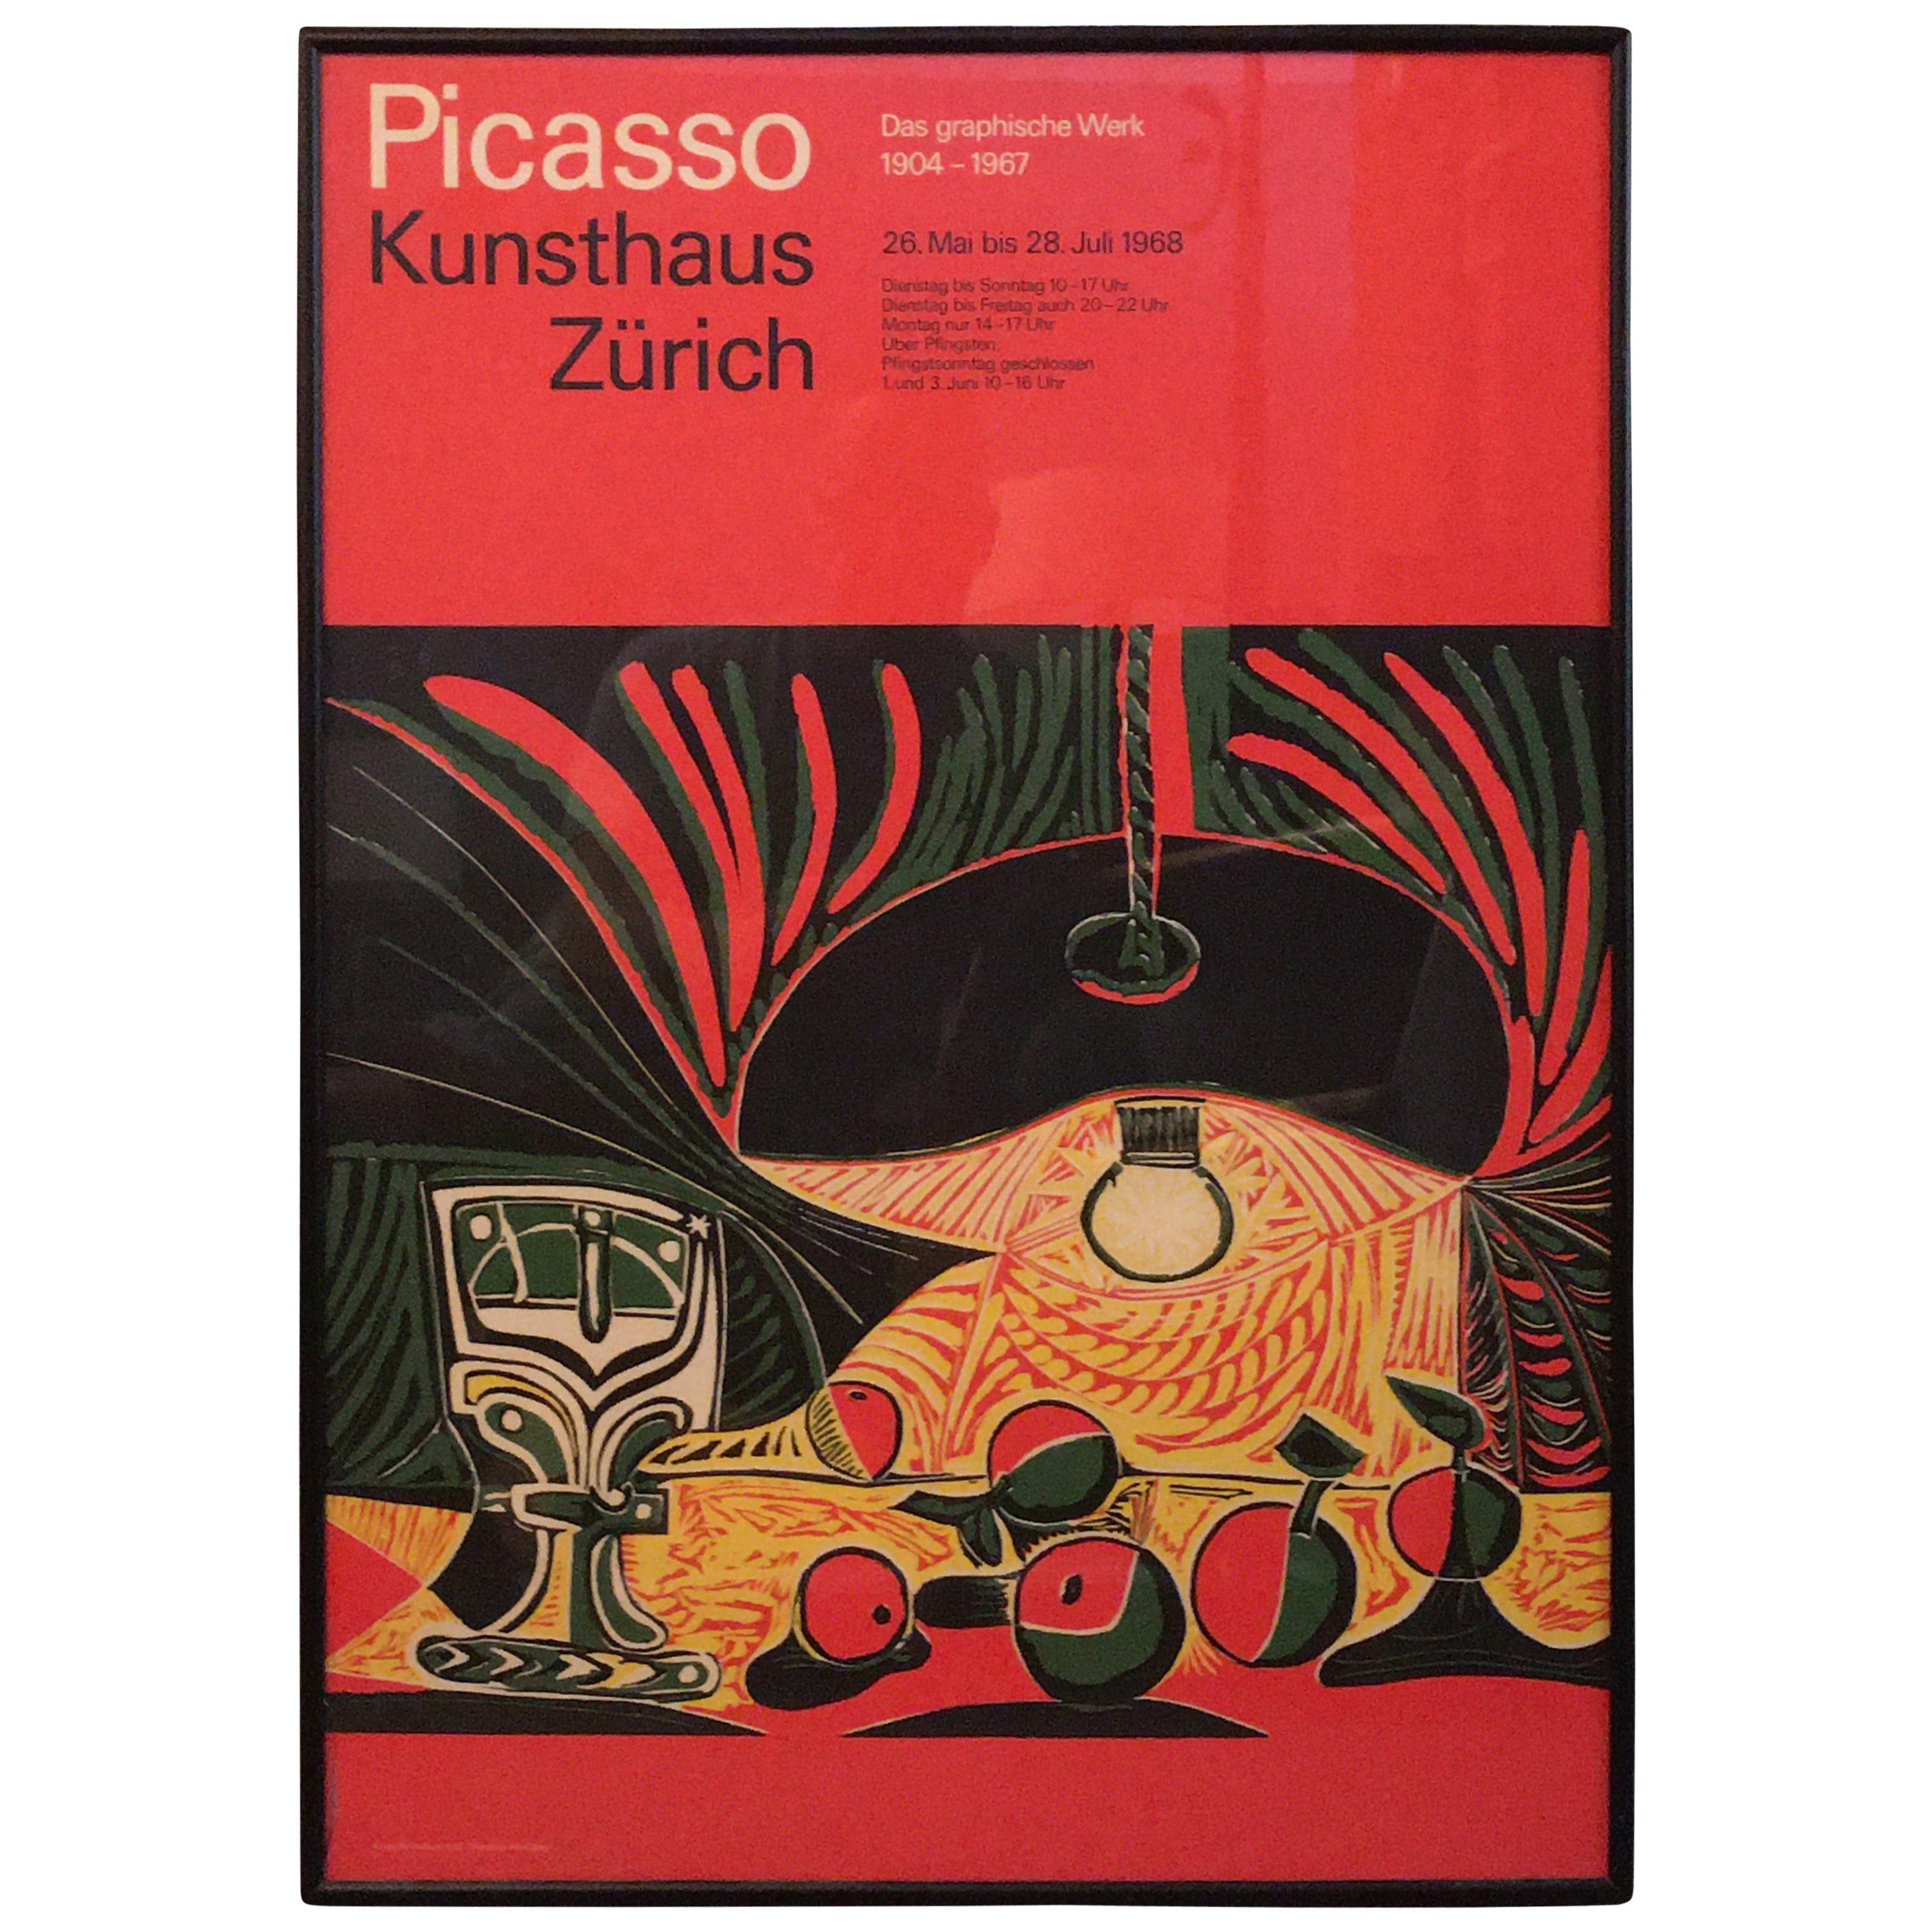 Picasso Exhibition Poster 1968